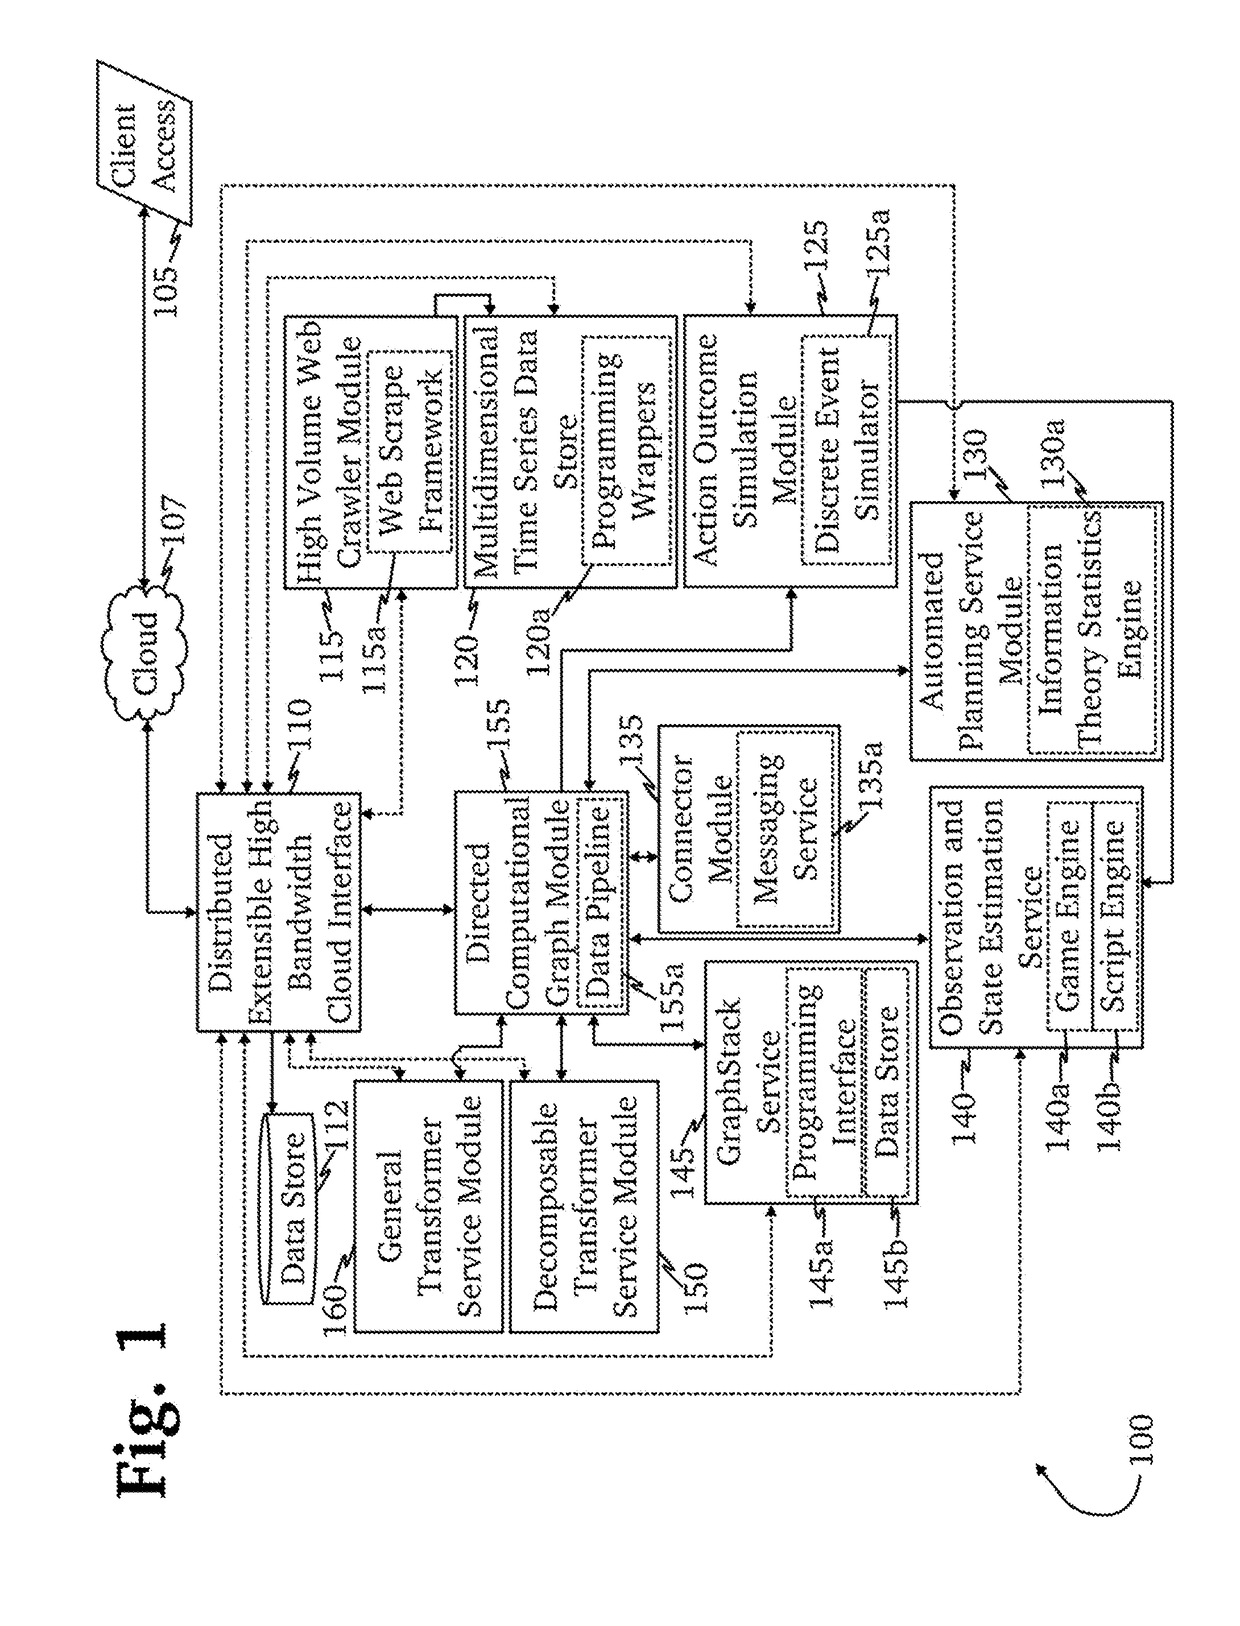 System and methods for multi-language abstract model creation for digital environment simulations